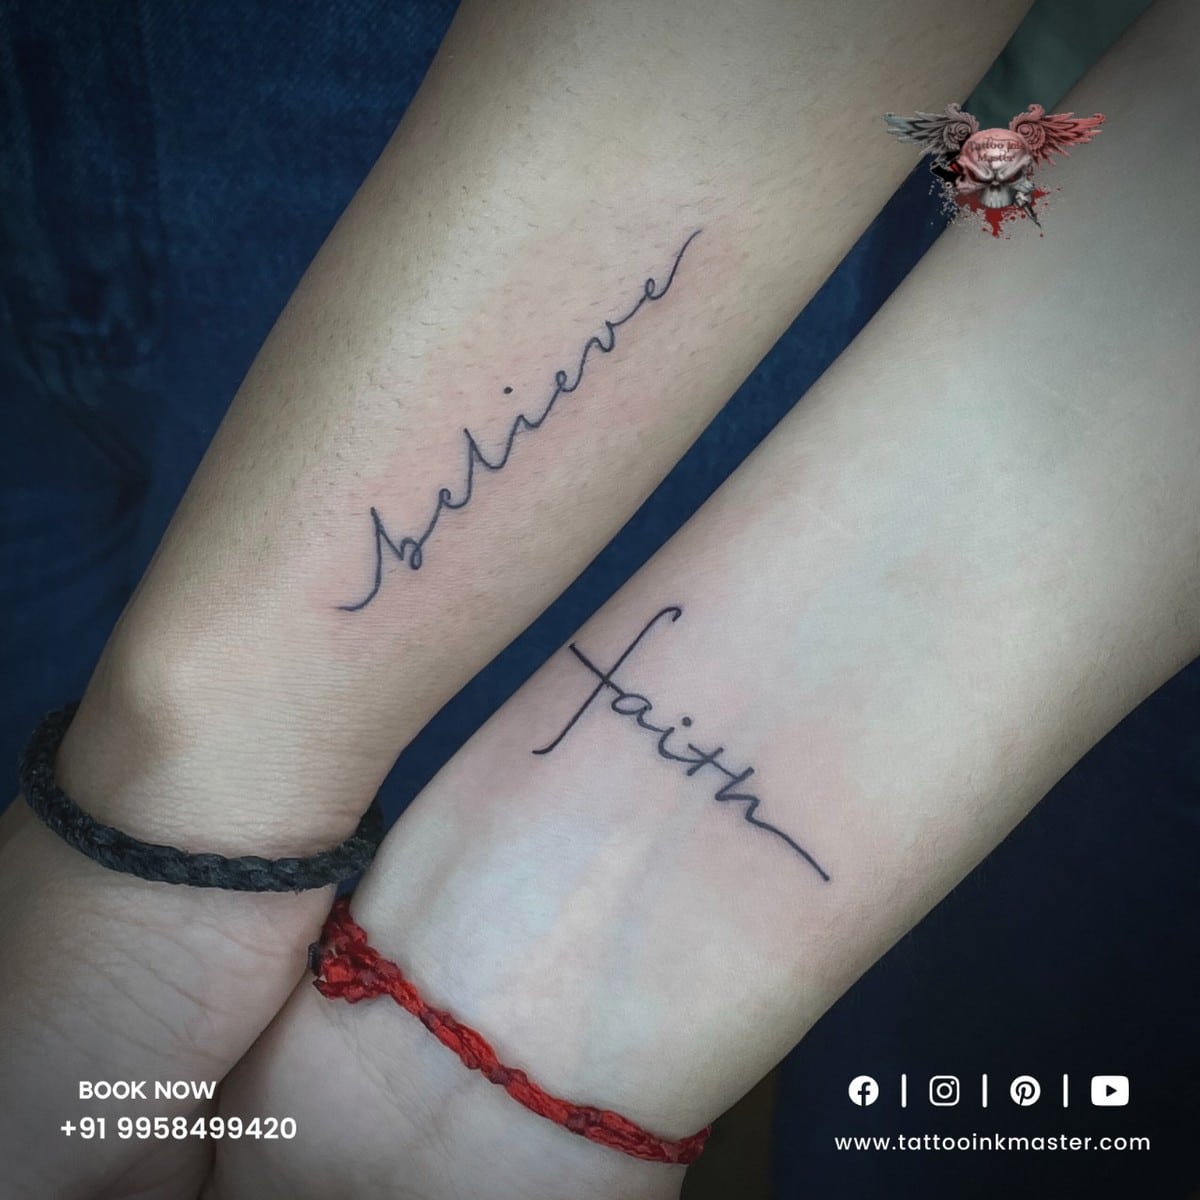 Tattoo uploaded by Storylines tattoo • believe handwriting - healed after 4  months. • Tattoodo